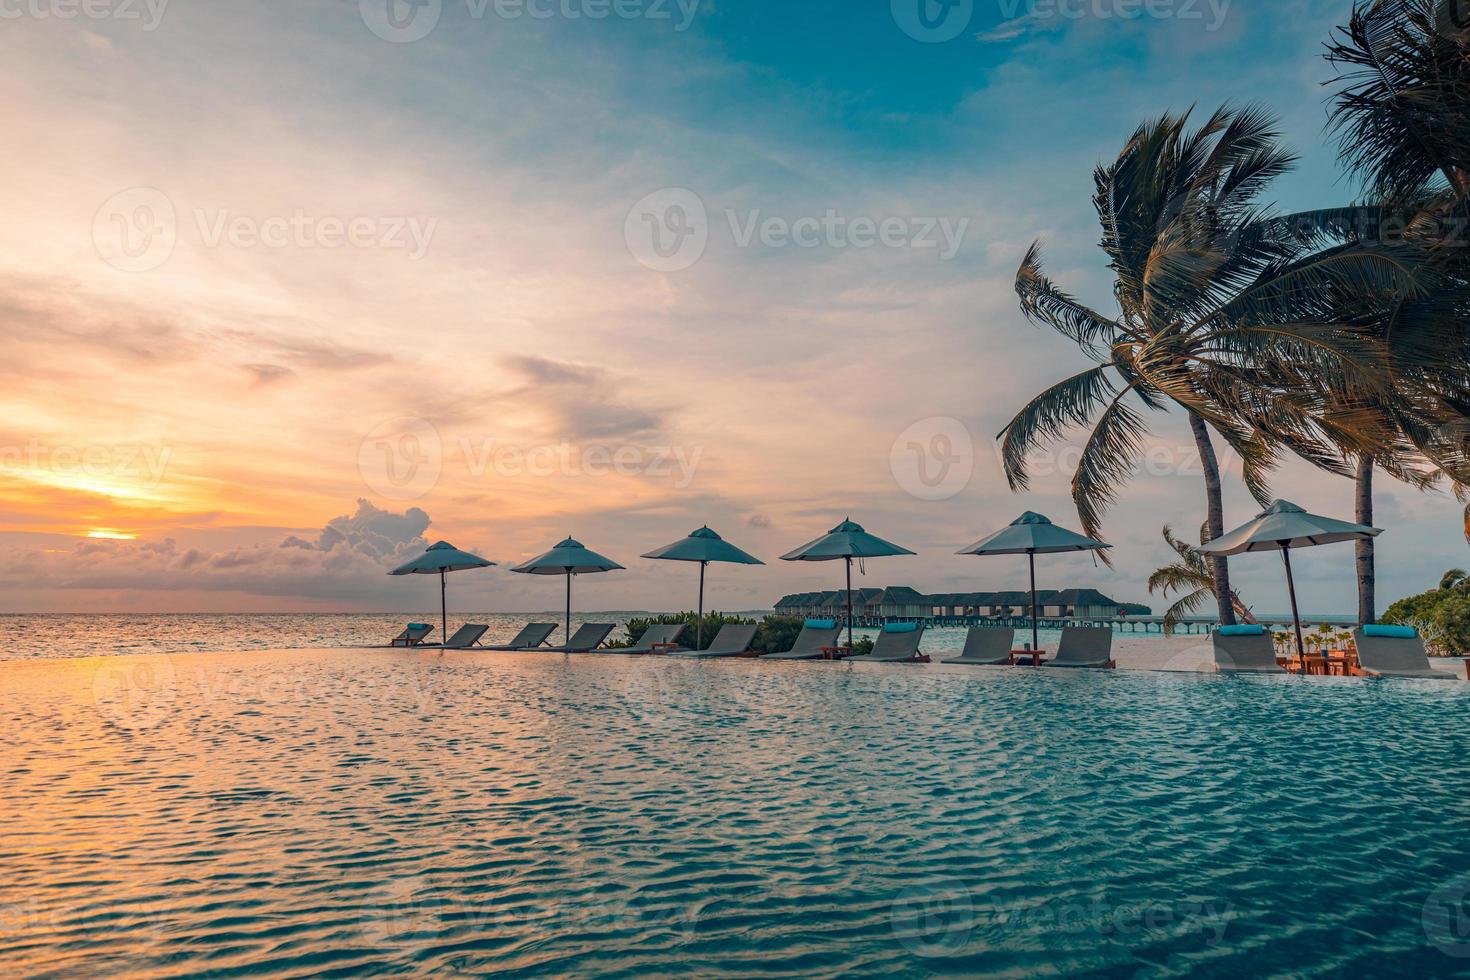 Outdoor luxury sunset over infinity pool swimming summer beachfront hotel resort, tropical landscape. Beautiful tranquil beach holiday vacation background. Amazing island sunset beach view, palm trees photo